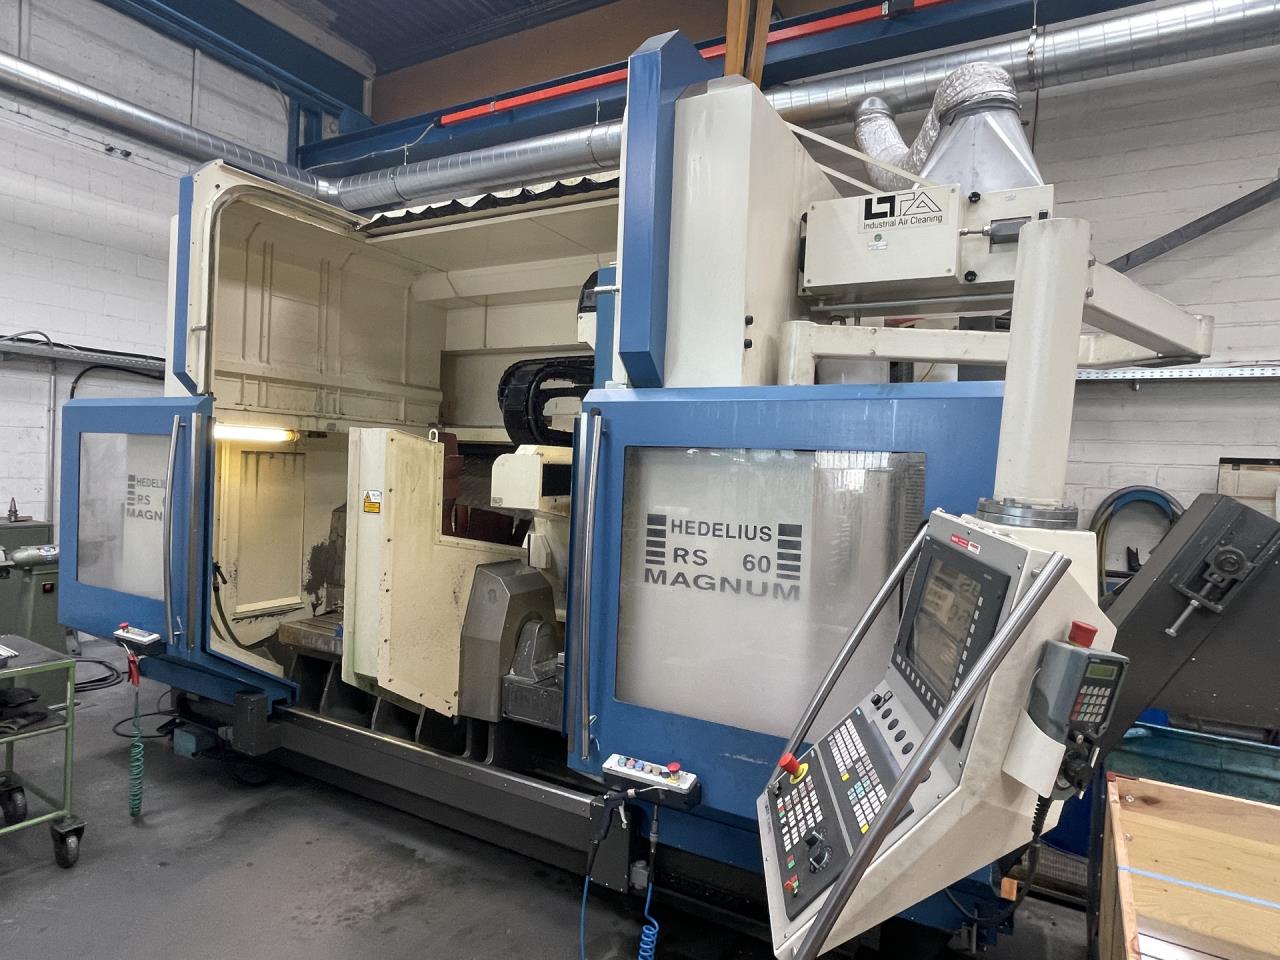 Five-axis Machining Centres/HEDELIUS  RS 60 MAGNUM-2000